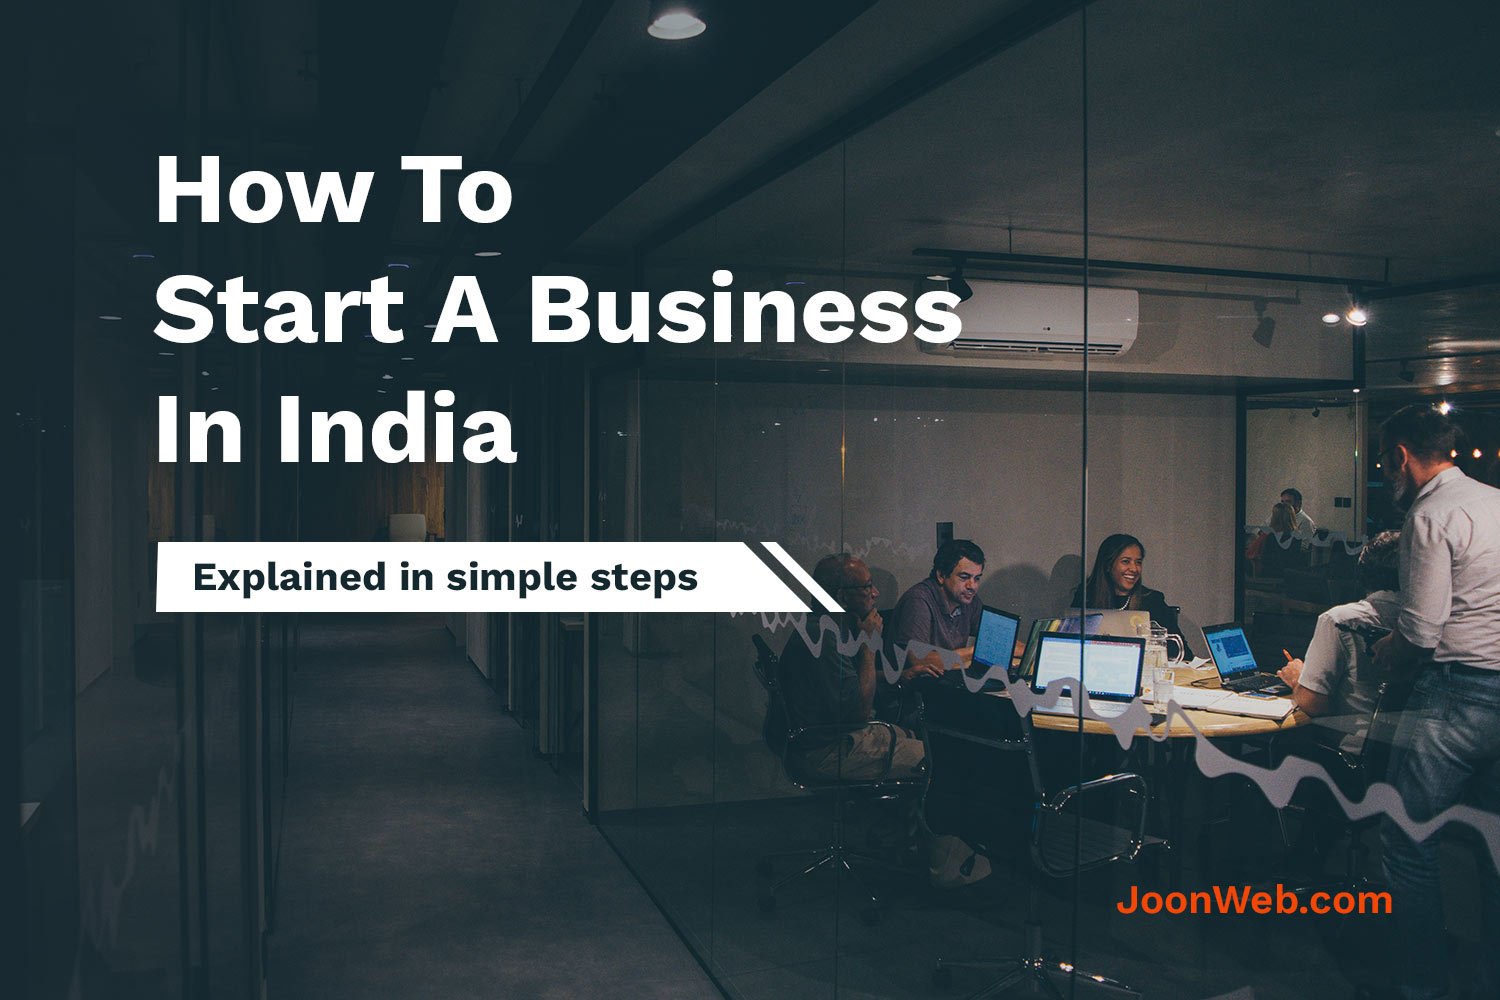 How To Start A Business In India 2022: Step-By-Step Detailed Explanation Image